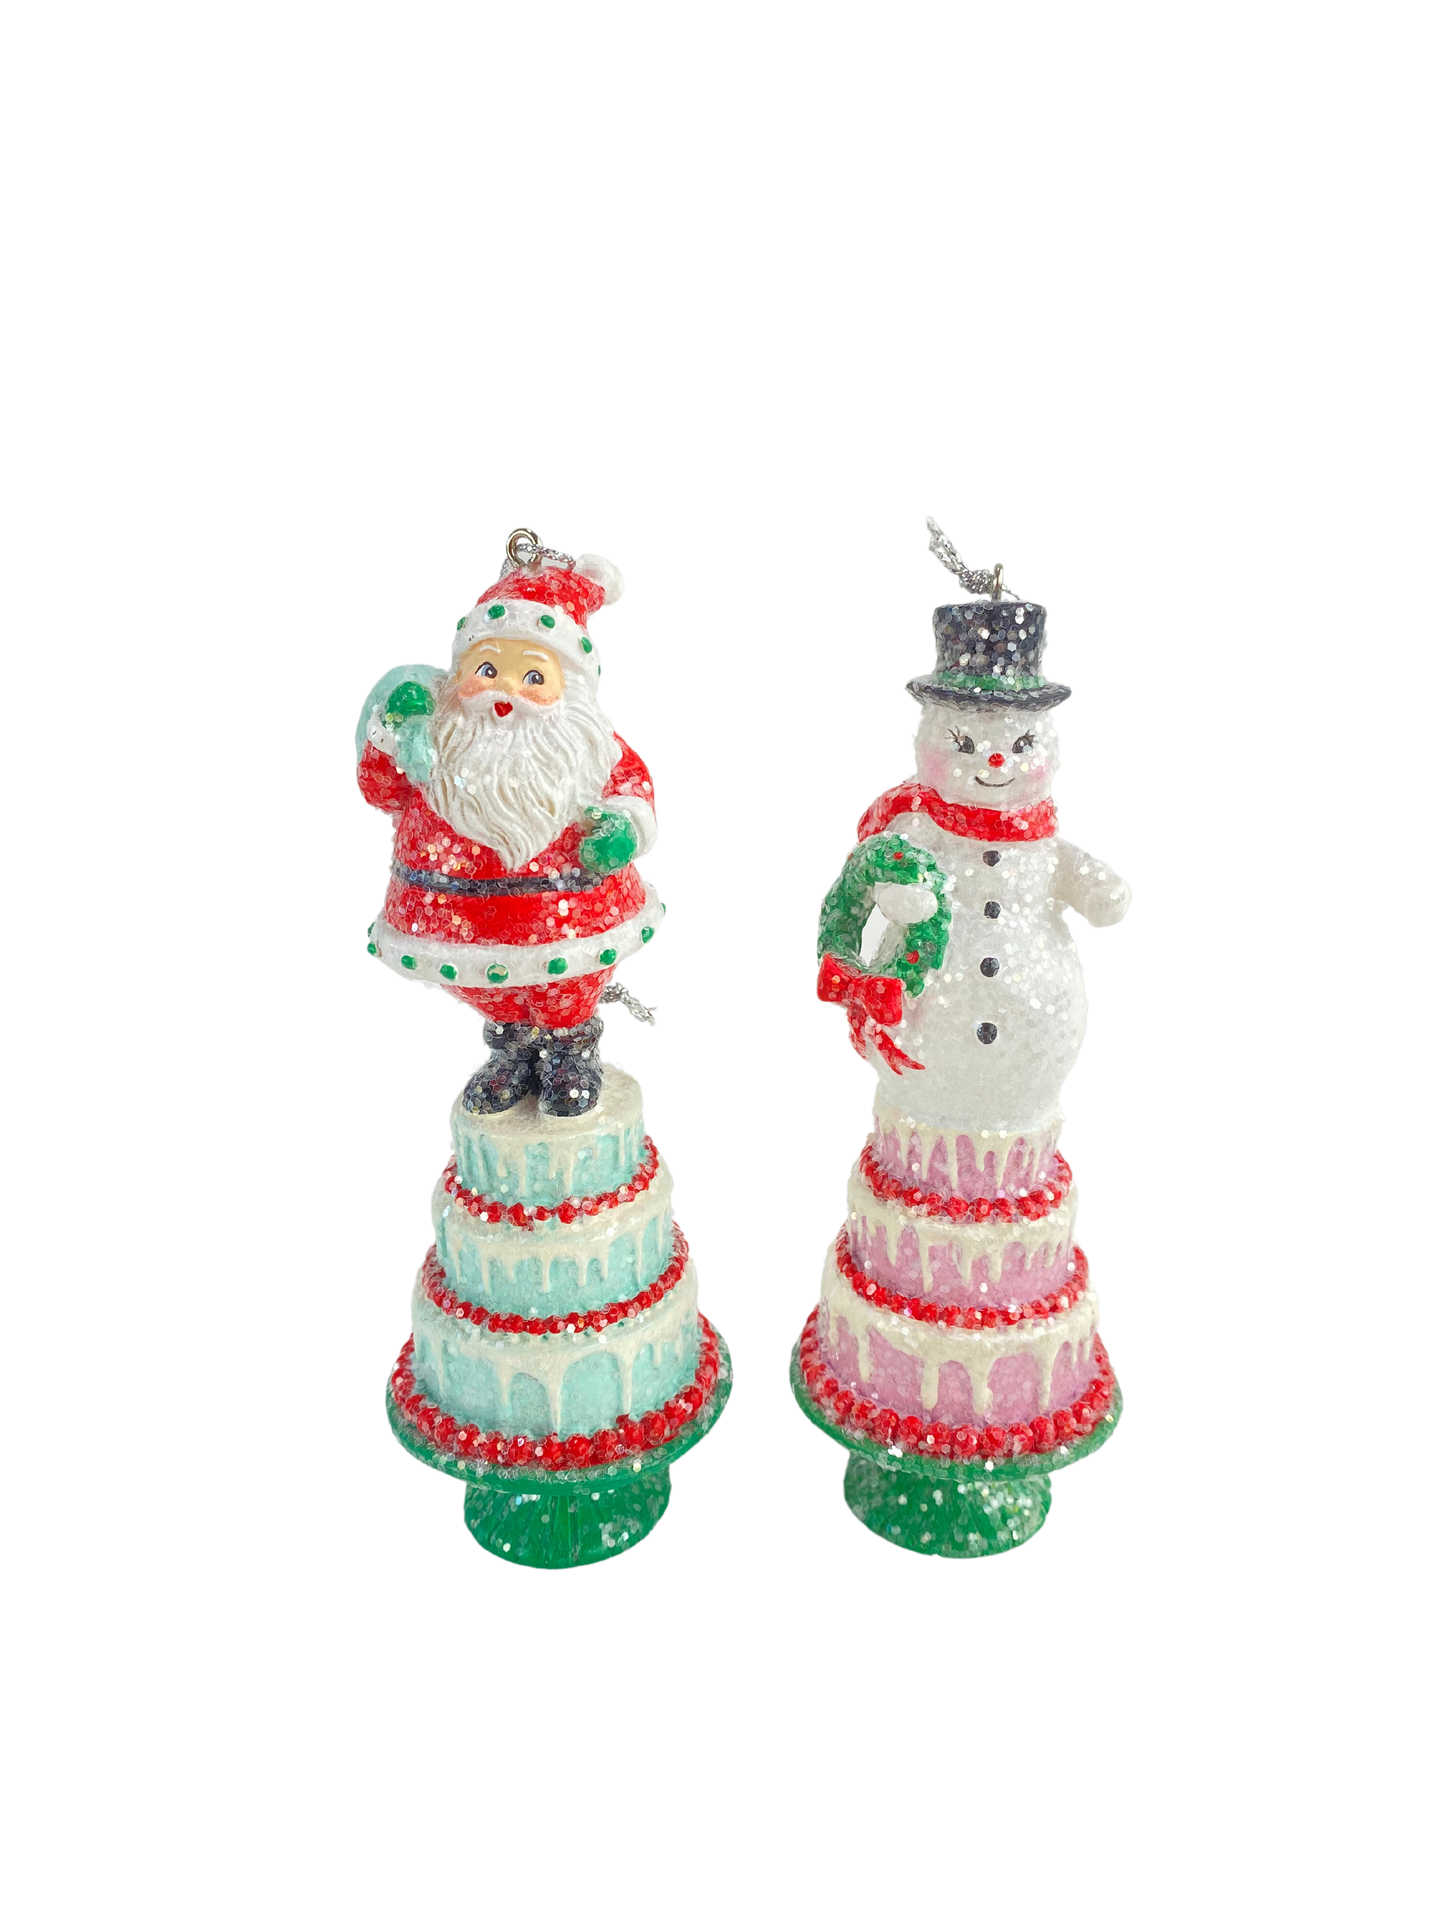 Traditional Santa and Snowman on Cake Ornament